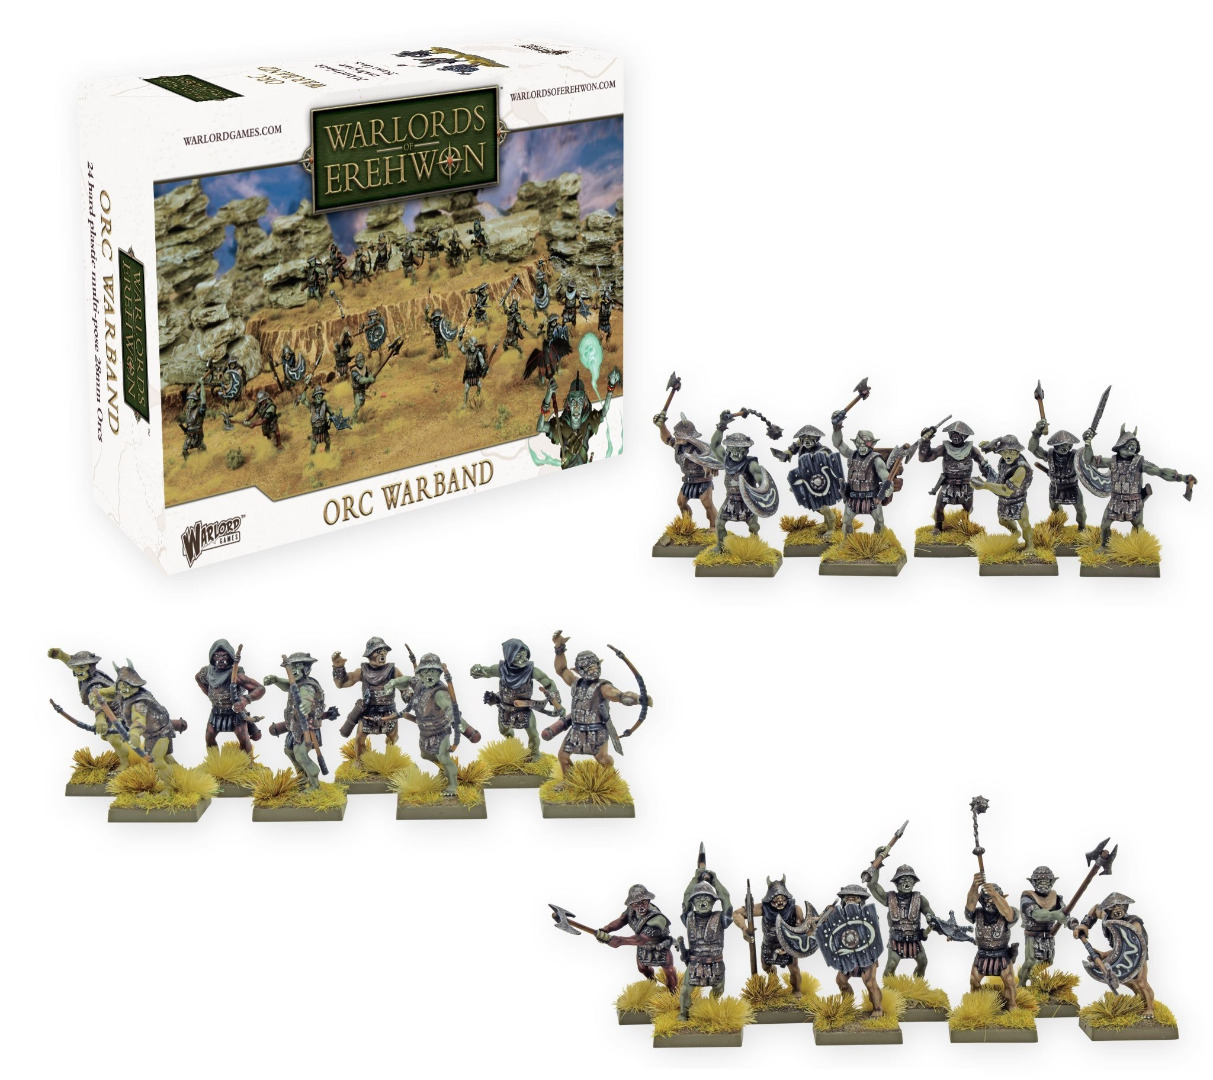 Warlords of Erehwon Orc Warband - EN